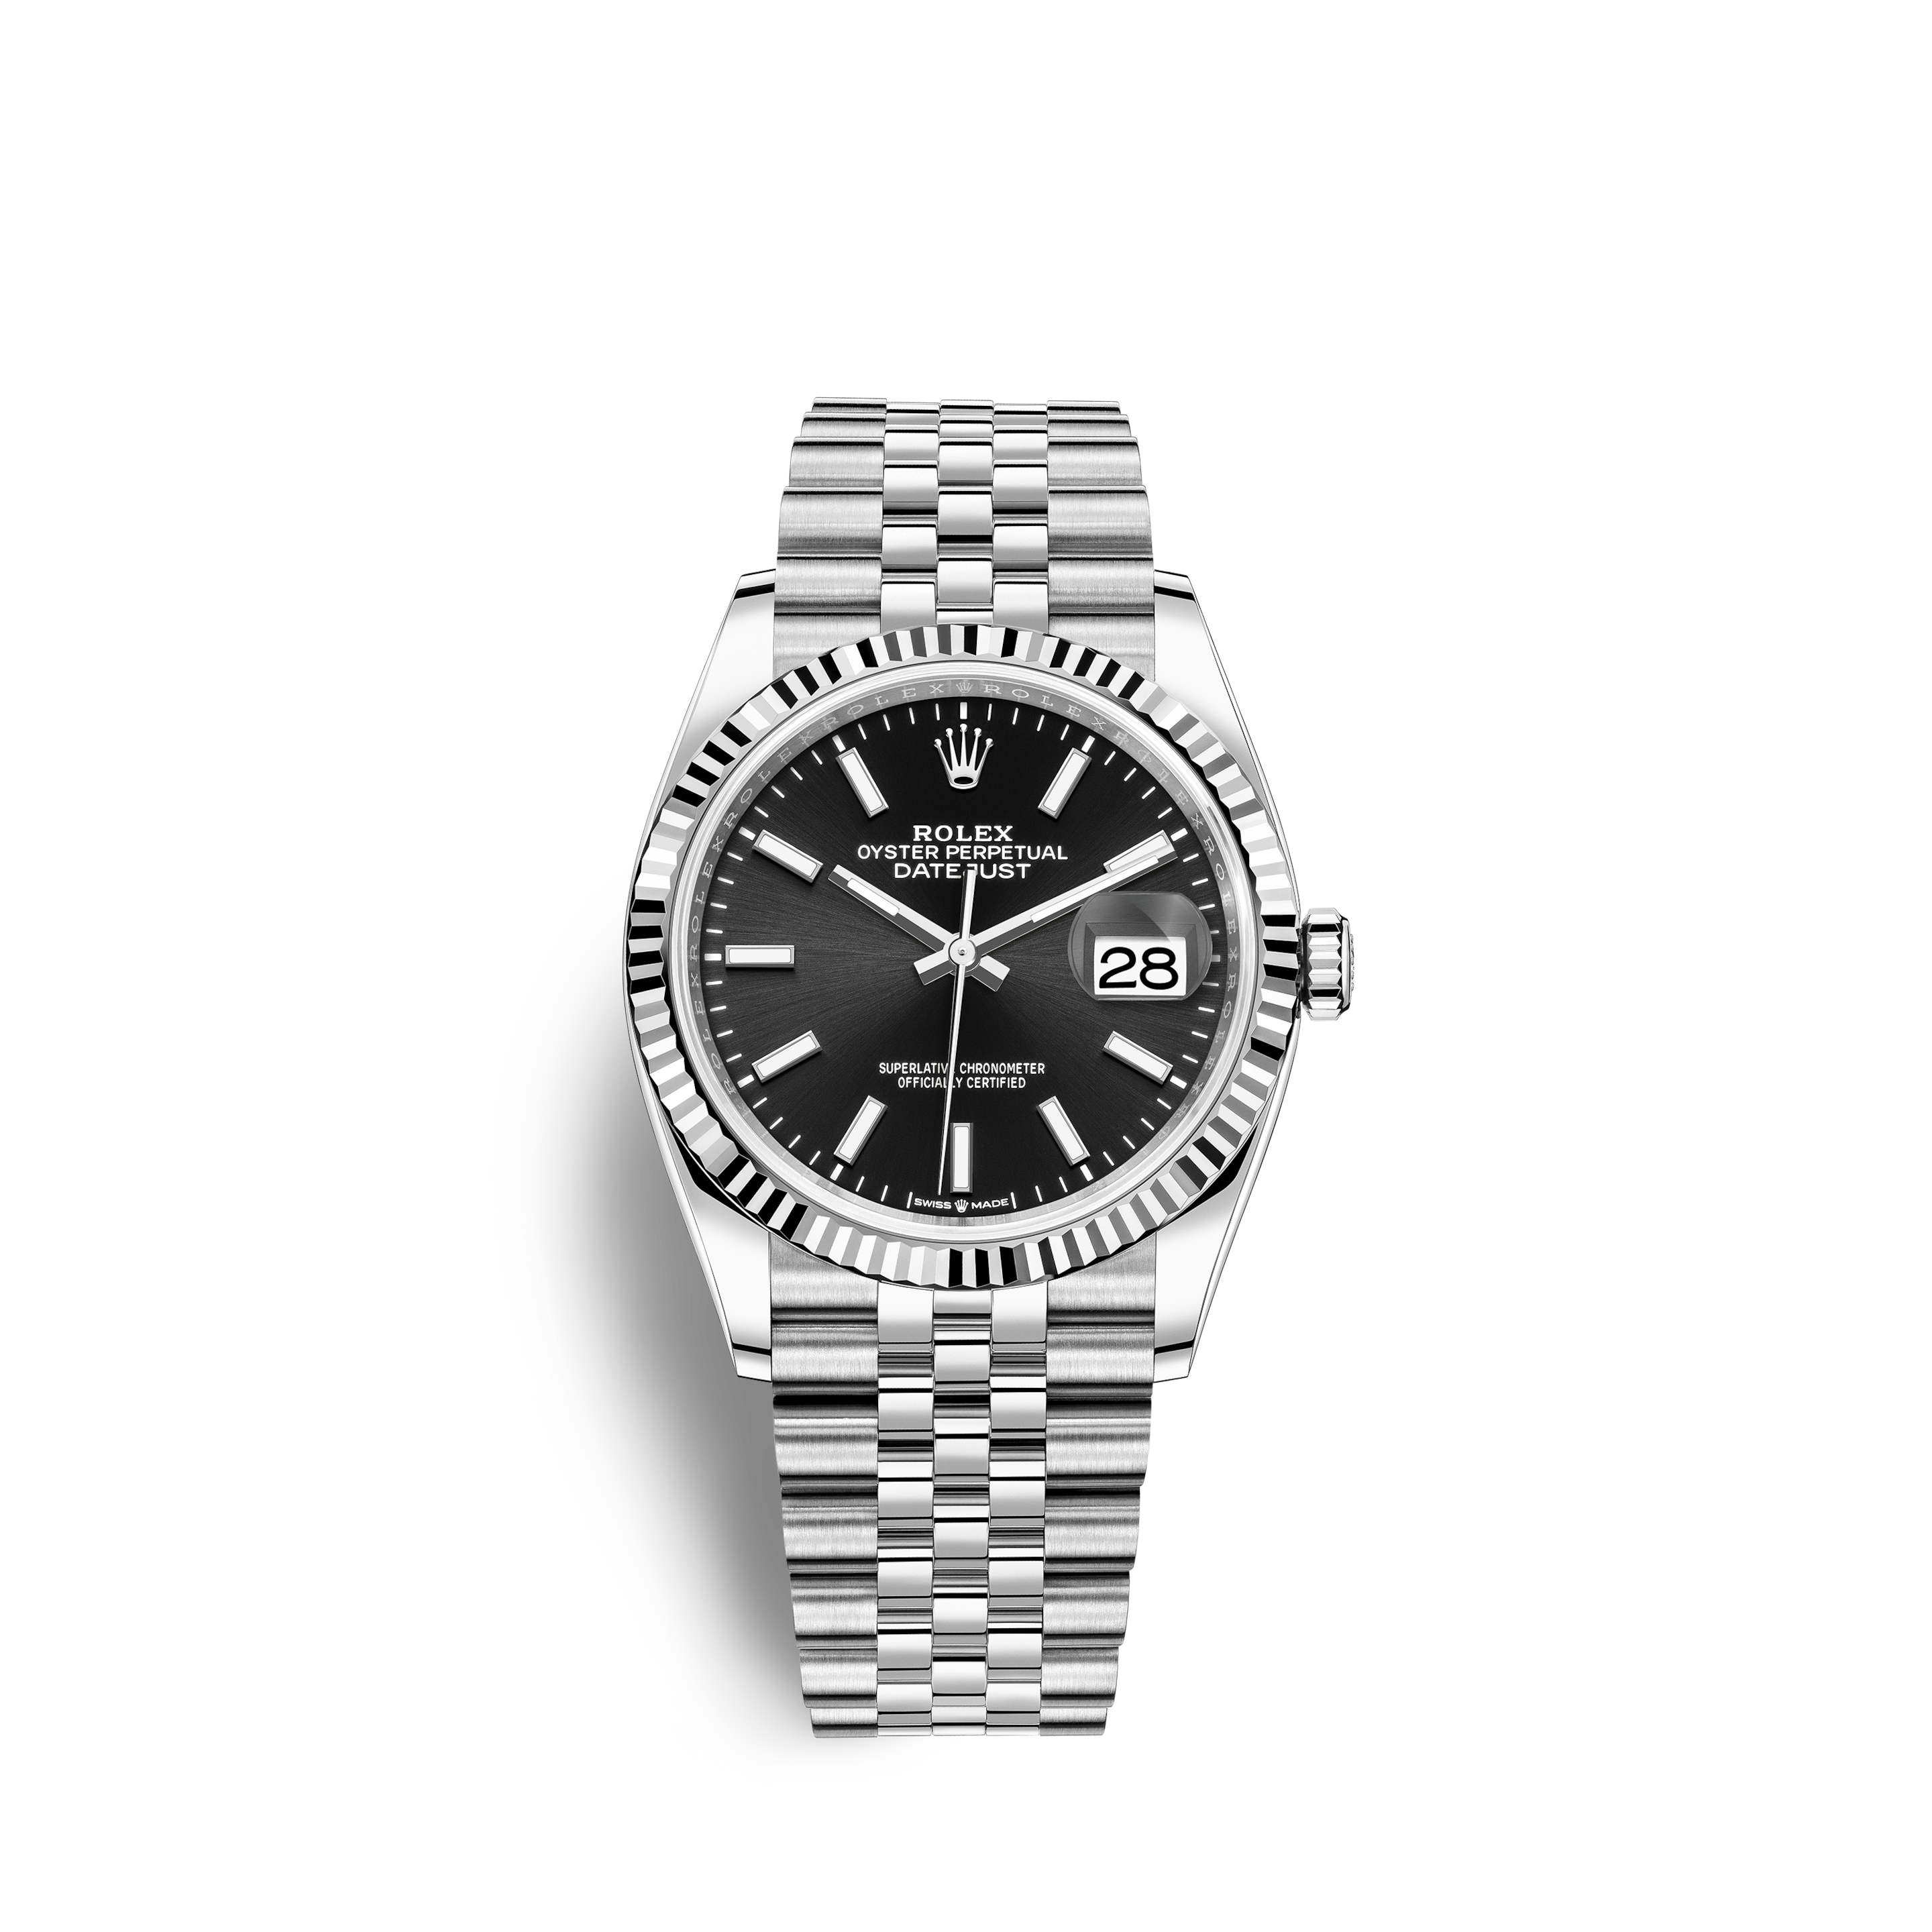 Rolex Datejust - The Classic Watch of 